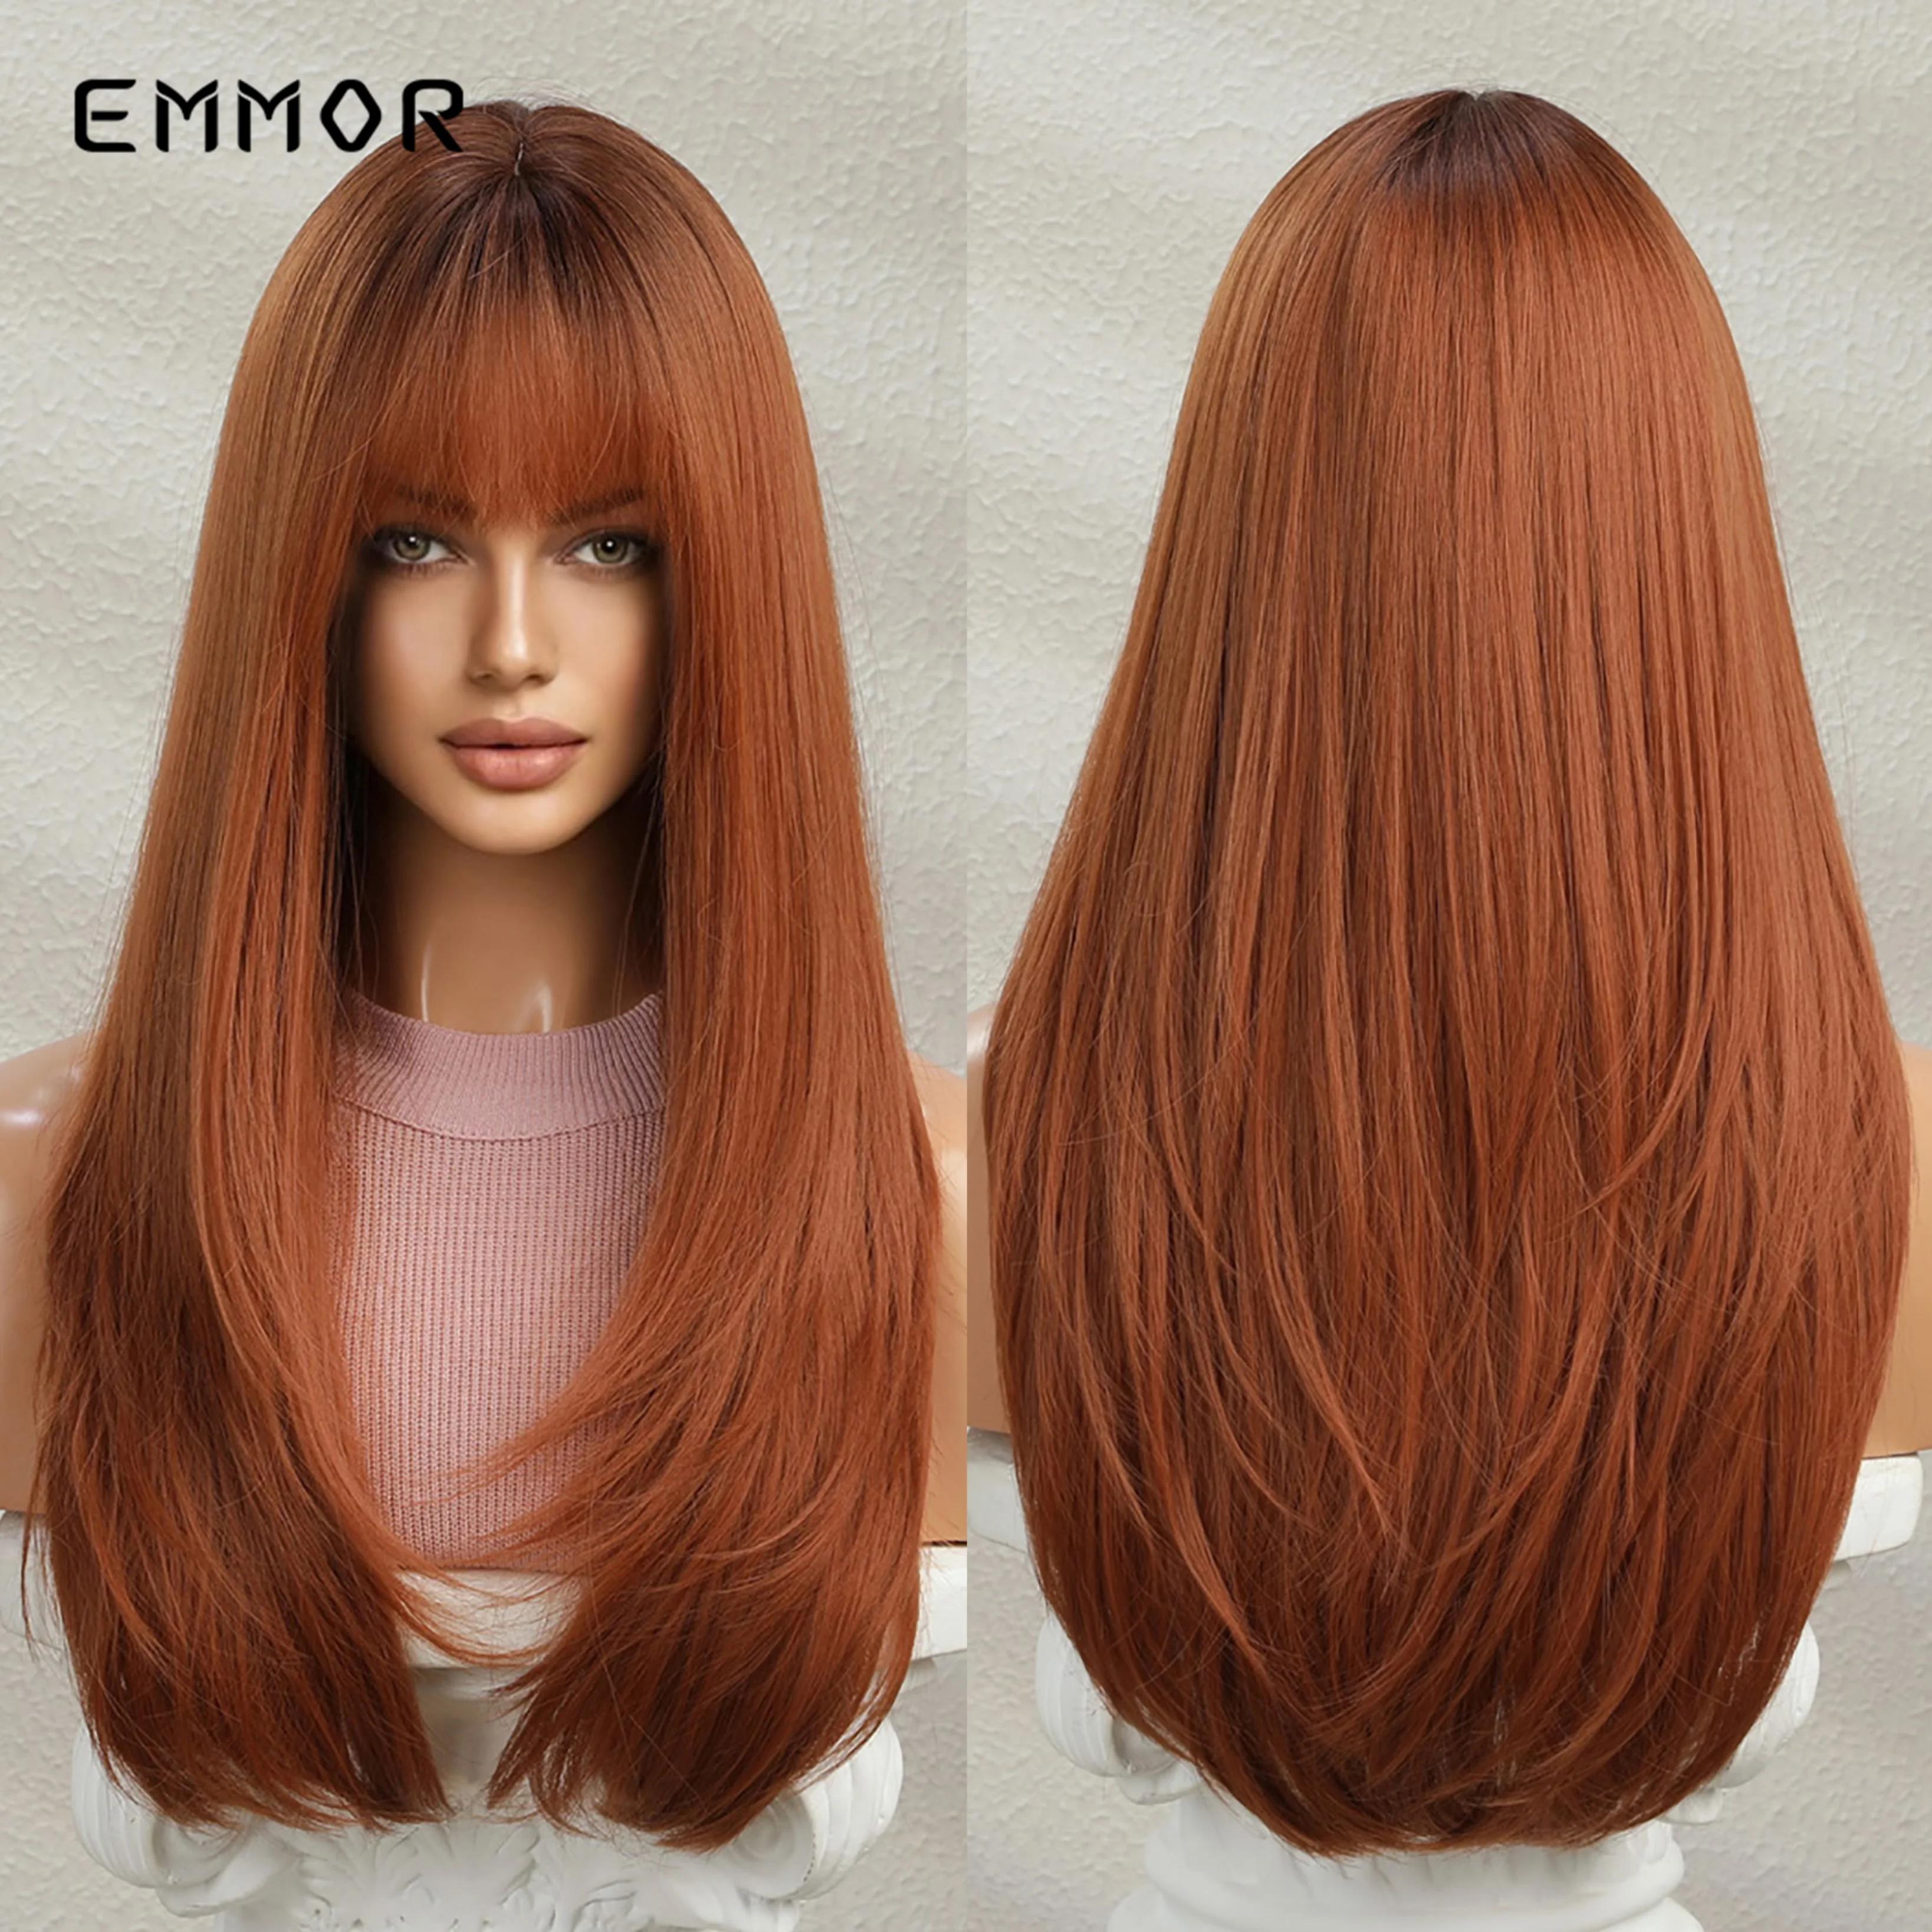 Emmor Synthetic Wig Orange Straight Hair Wigs with Bangs High Temperature Halloween Cosplay Daily Use Wig for Women